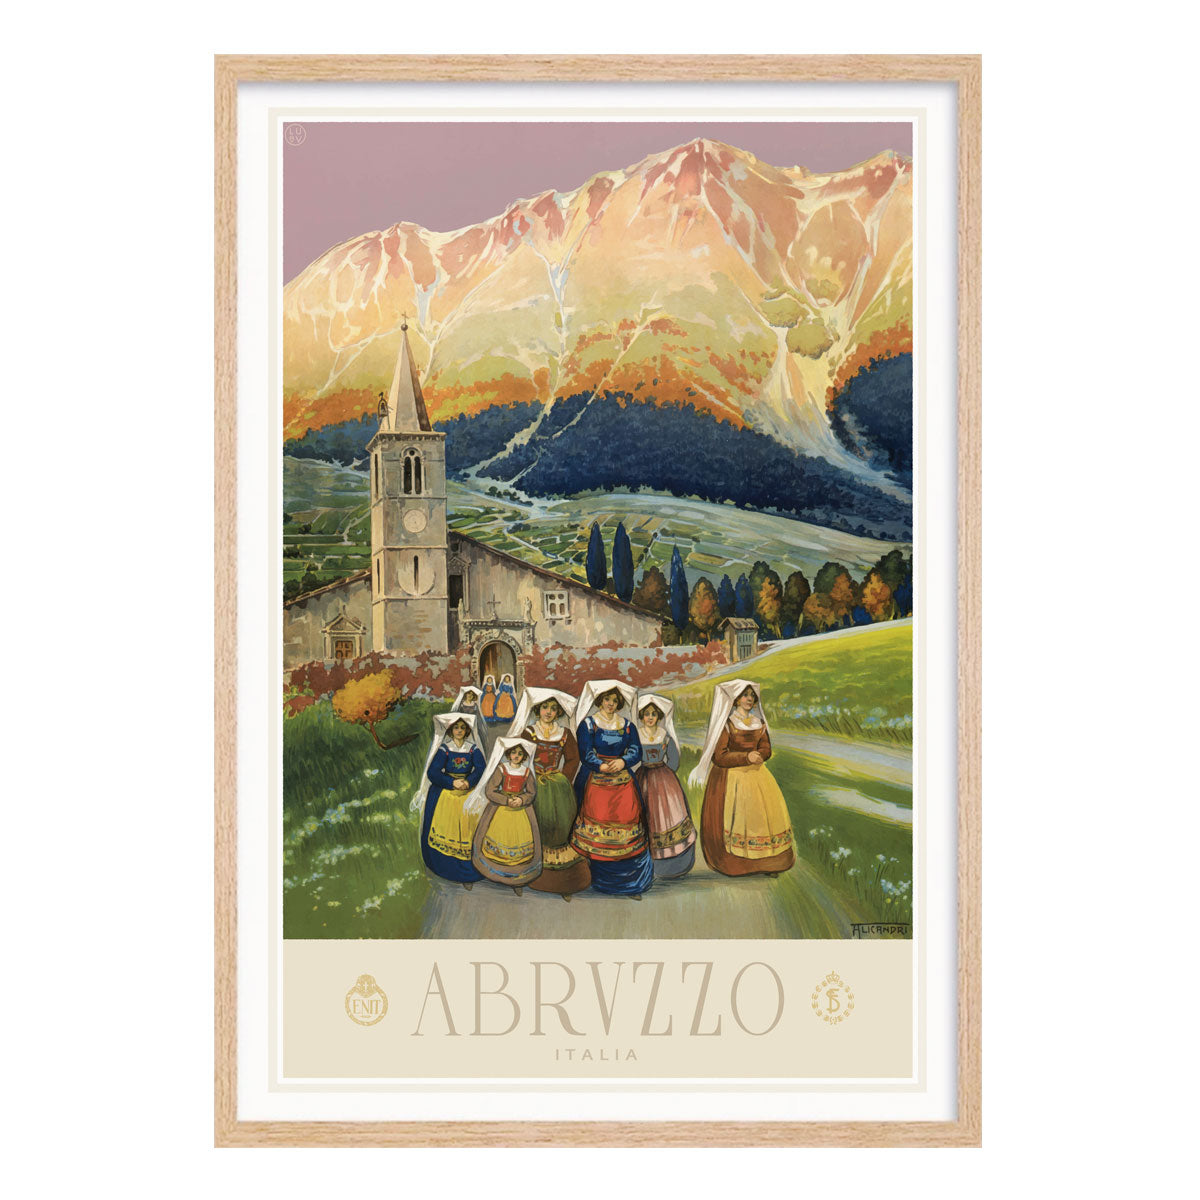 Abrvzzo Italy retro vintage poster print in oak frame from Places We Luv